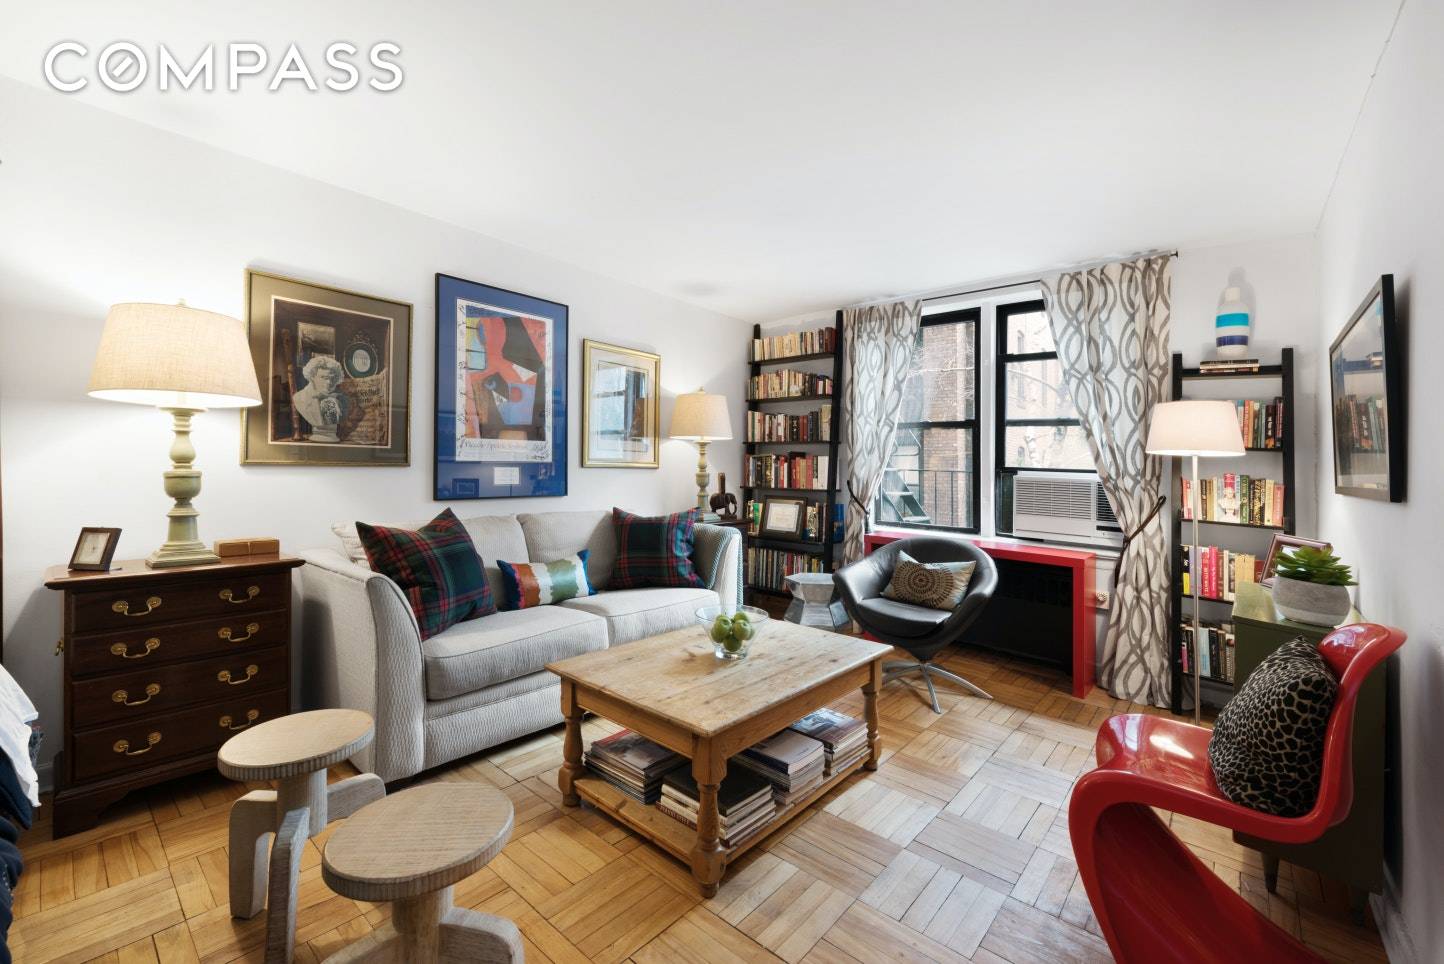 Chelsea Charmer ! Fall in love with this wonderfully bright and spacious condo studio apartment in prime Chelsea that overlooks lush green trees and building s lovely rear garden.